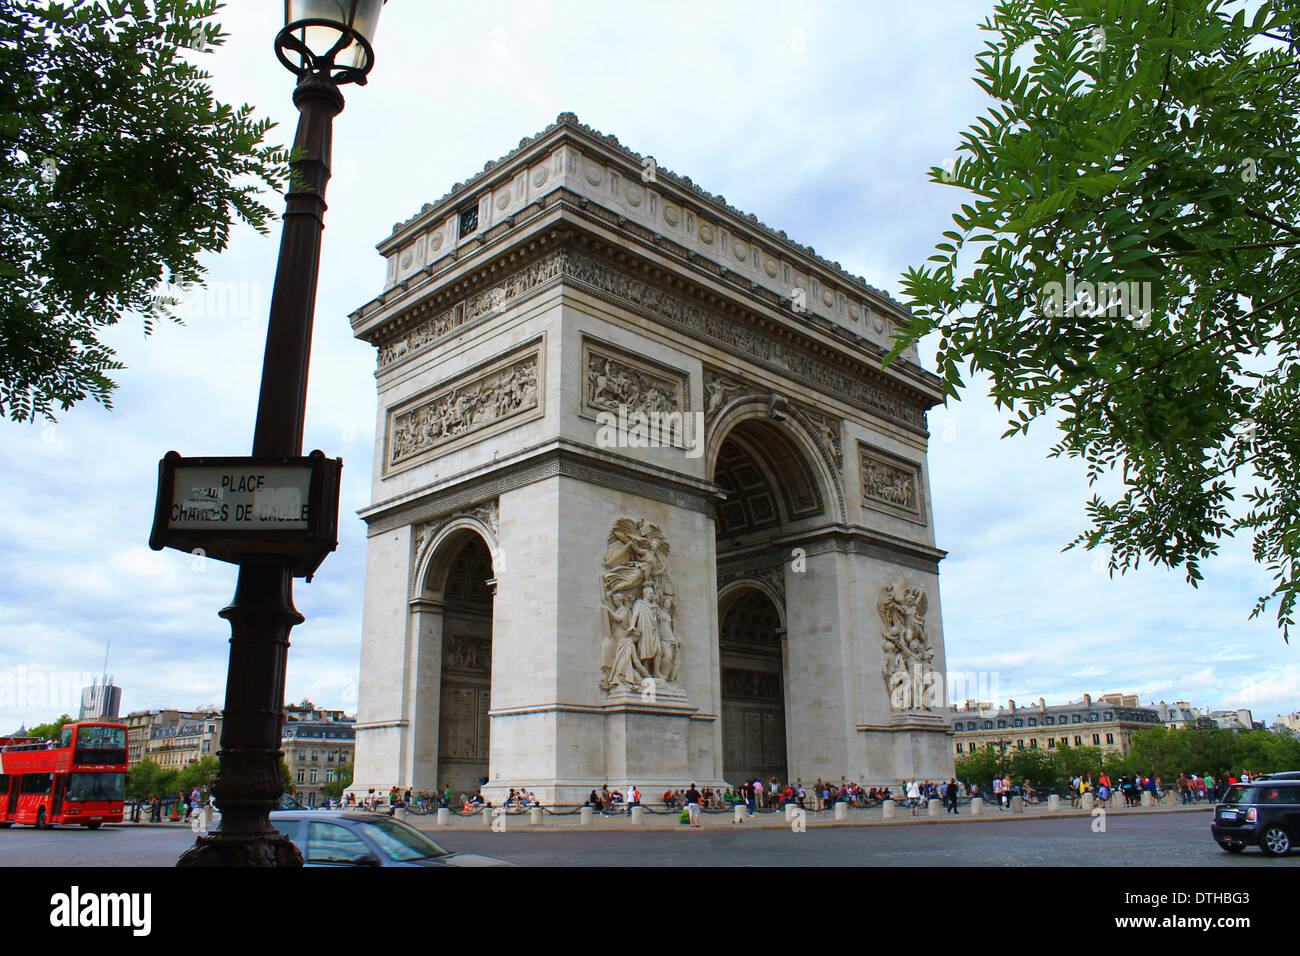 A view of the Arc de Triomphe roundabout in Paris, France. Stock Photo